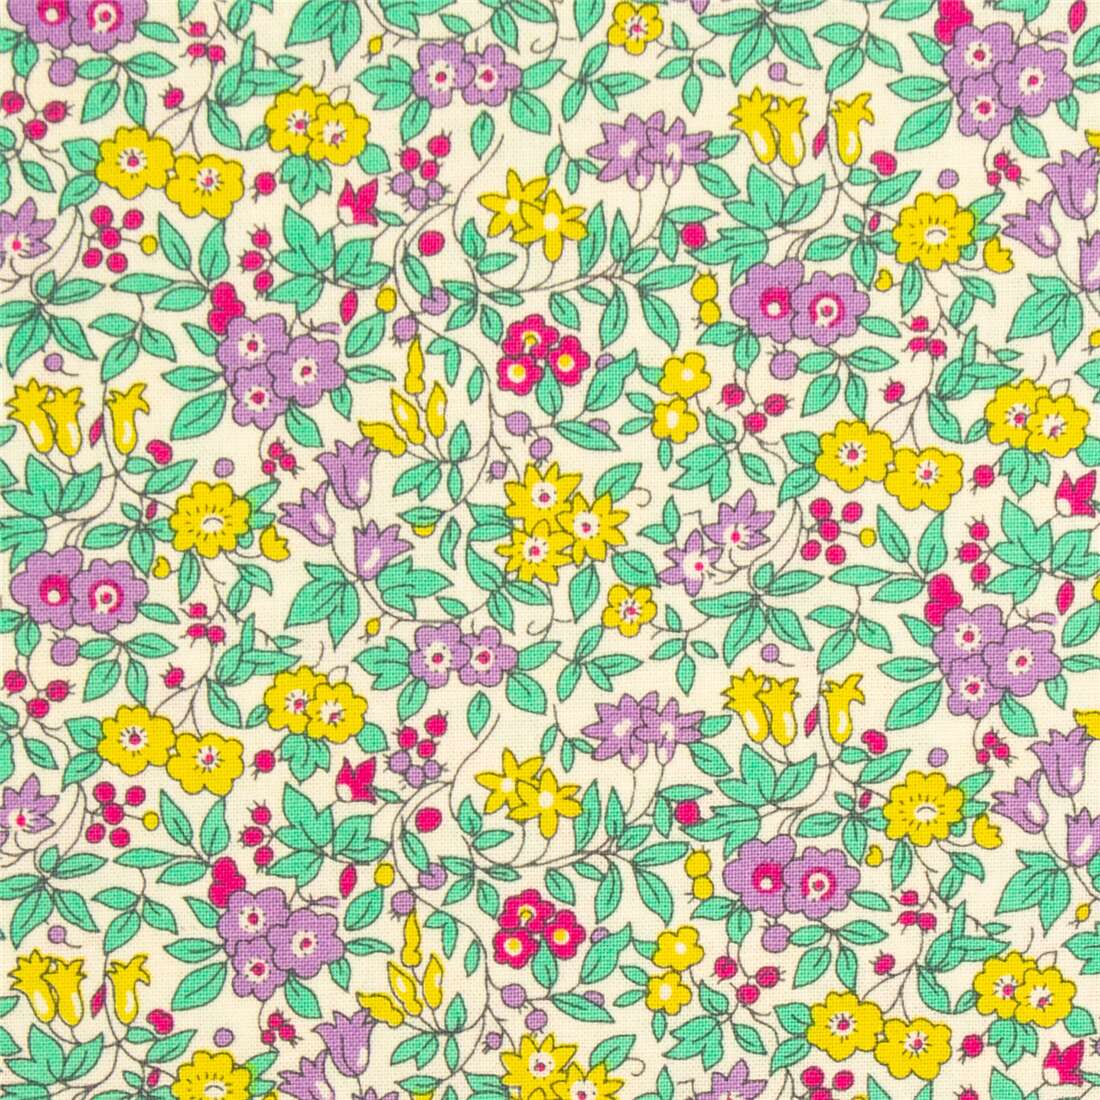 Blossom Fabric Floral Fabric Flowers Fabric Blooms Fabric Tiny Fabric Cotton Fabric Purple Fabric White Fabric Fabric by the yard